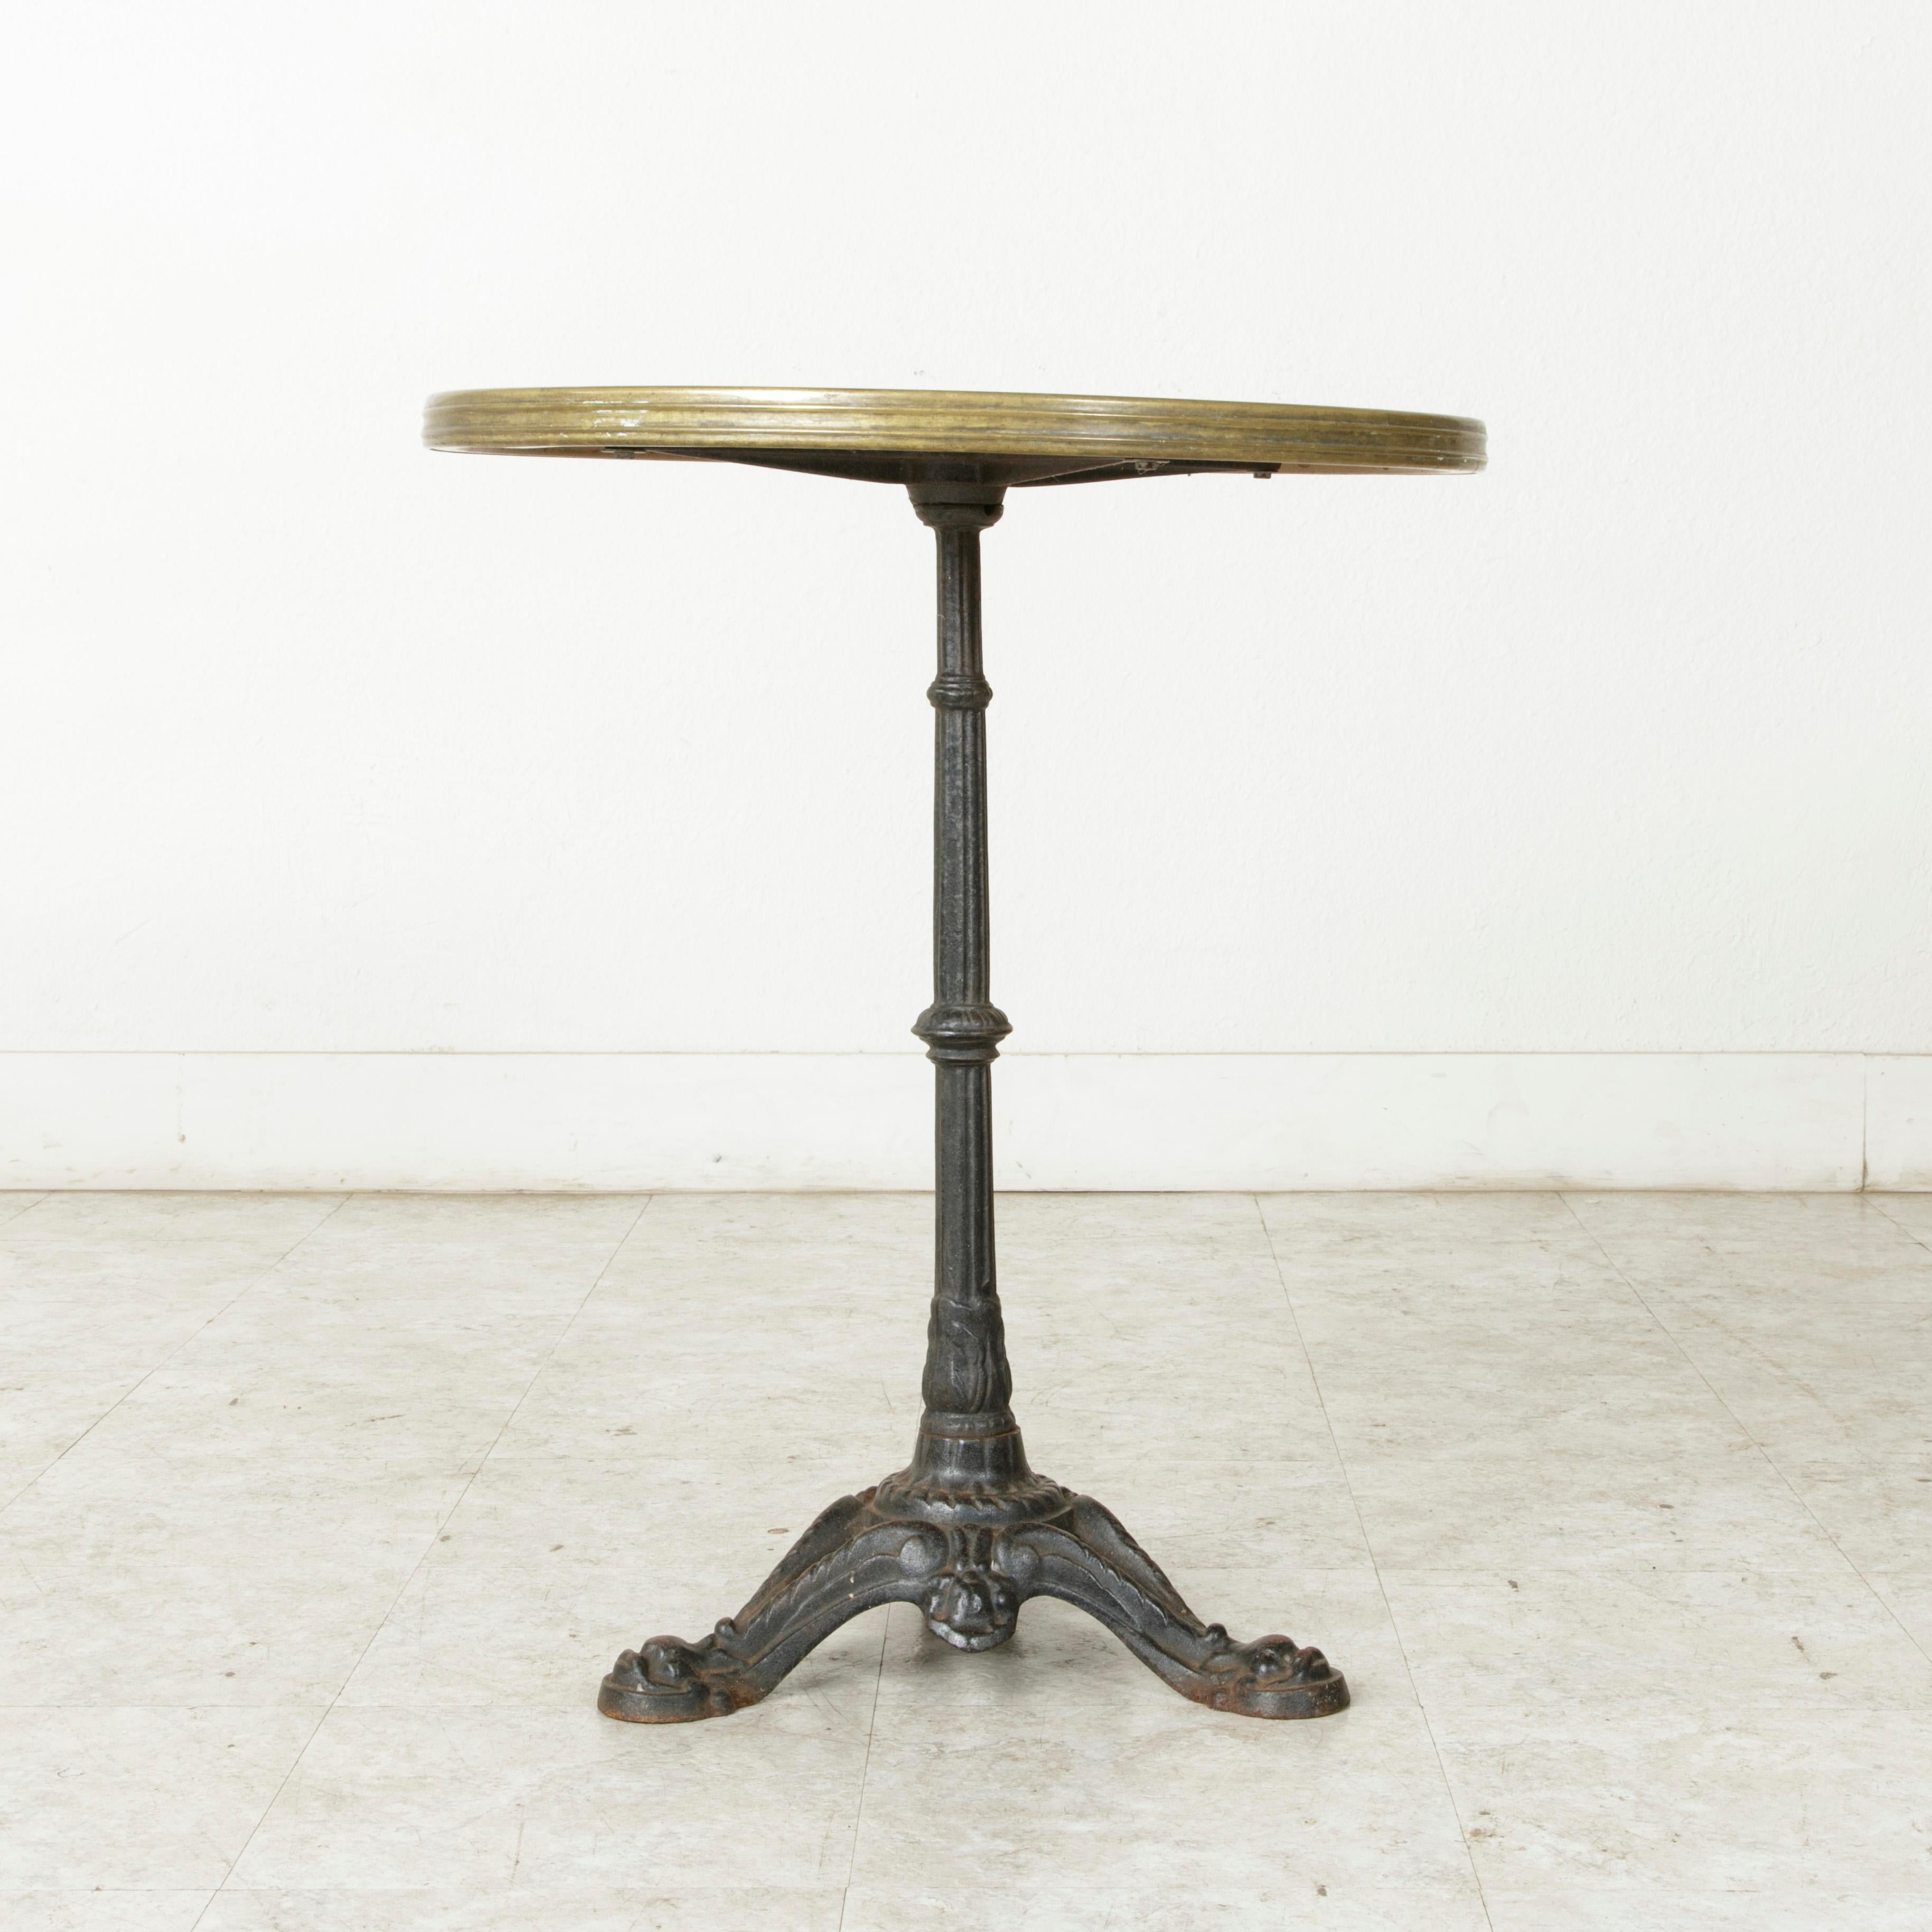 Cast Mid-20th Century French Iron Bistro Table with Faux Marble-Top and Brass Trim